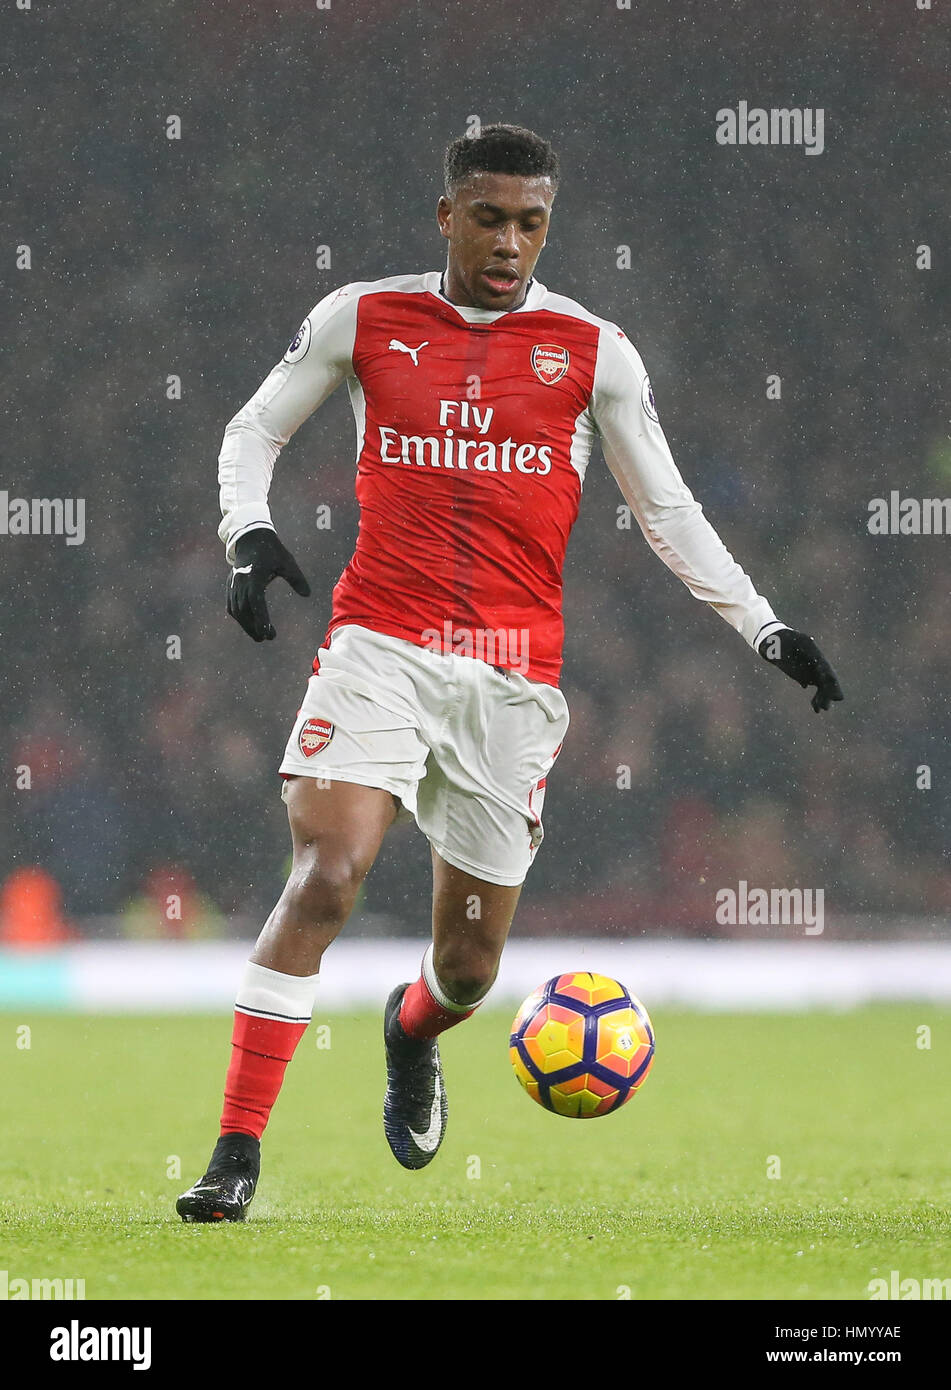 Alex Iwobi of Arsenal during the Premier League match between Arsenal and Watford at the Emirates Stadium in London. December 31, 2017. EDITORIAL USE ONLY Stock Photo